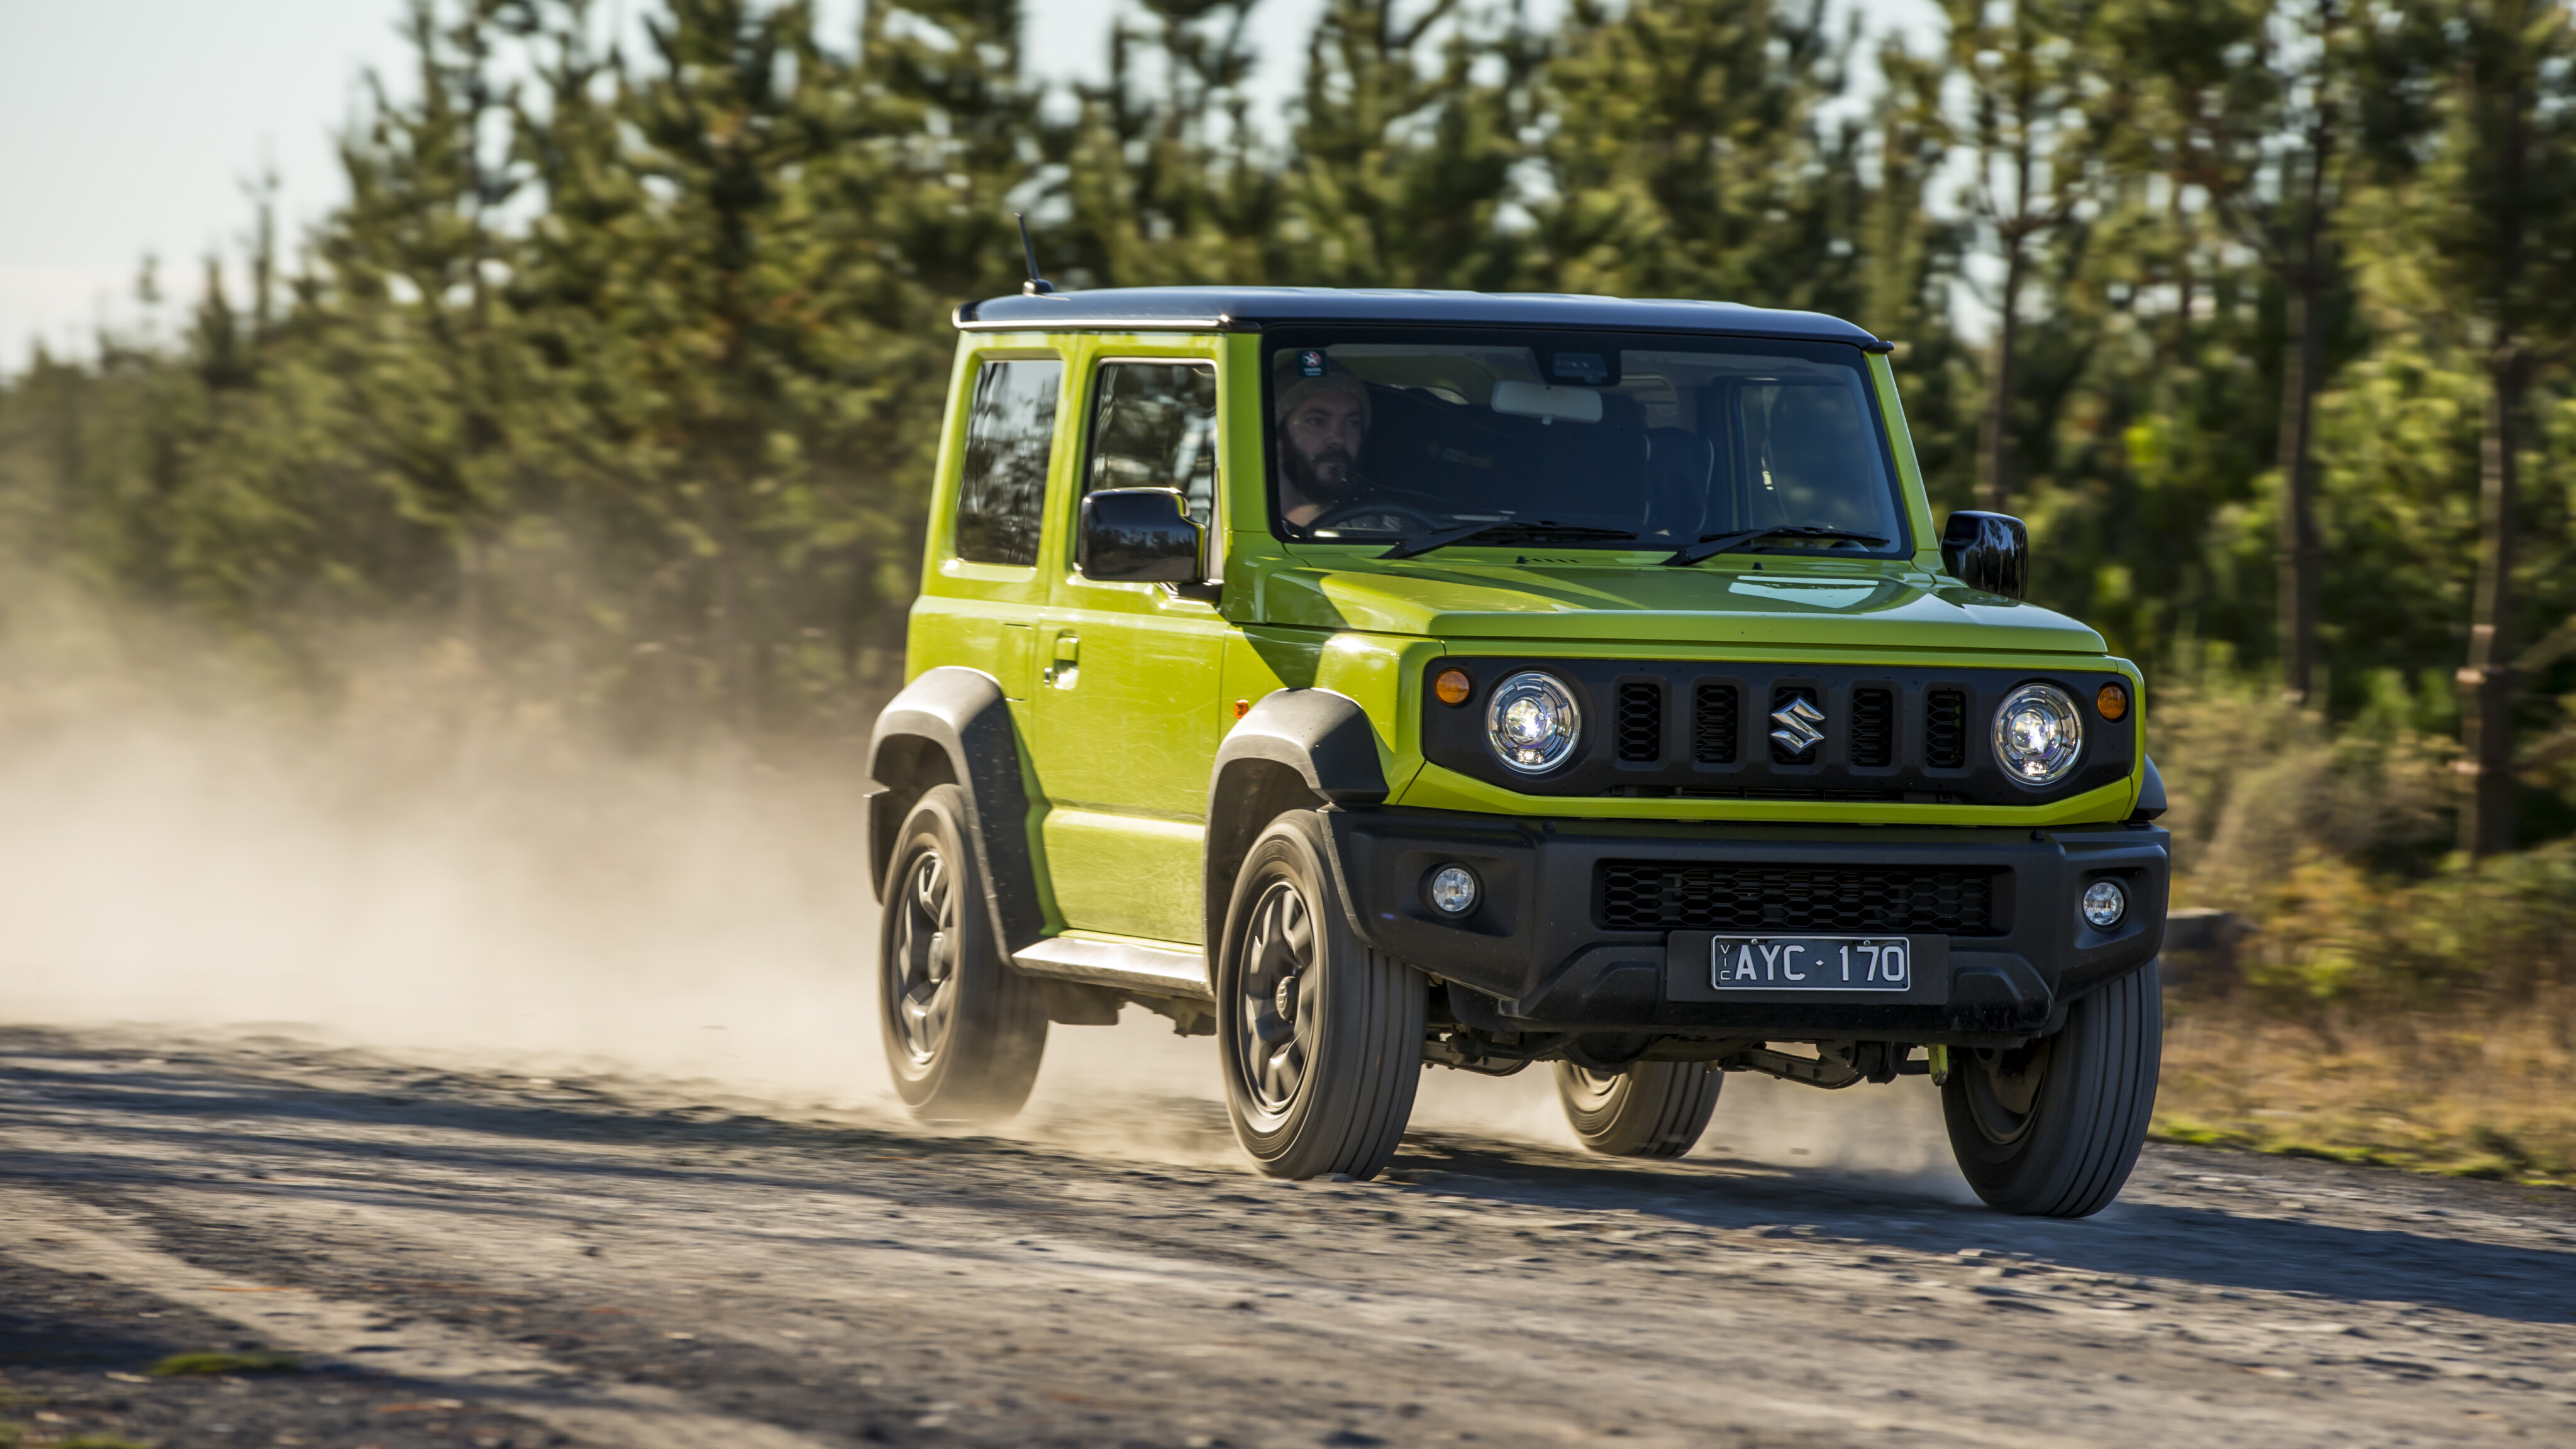 2021 Suzuki Jimny on- and off-road review